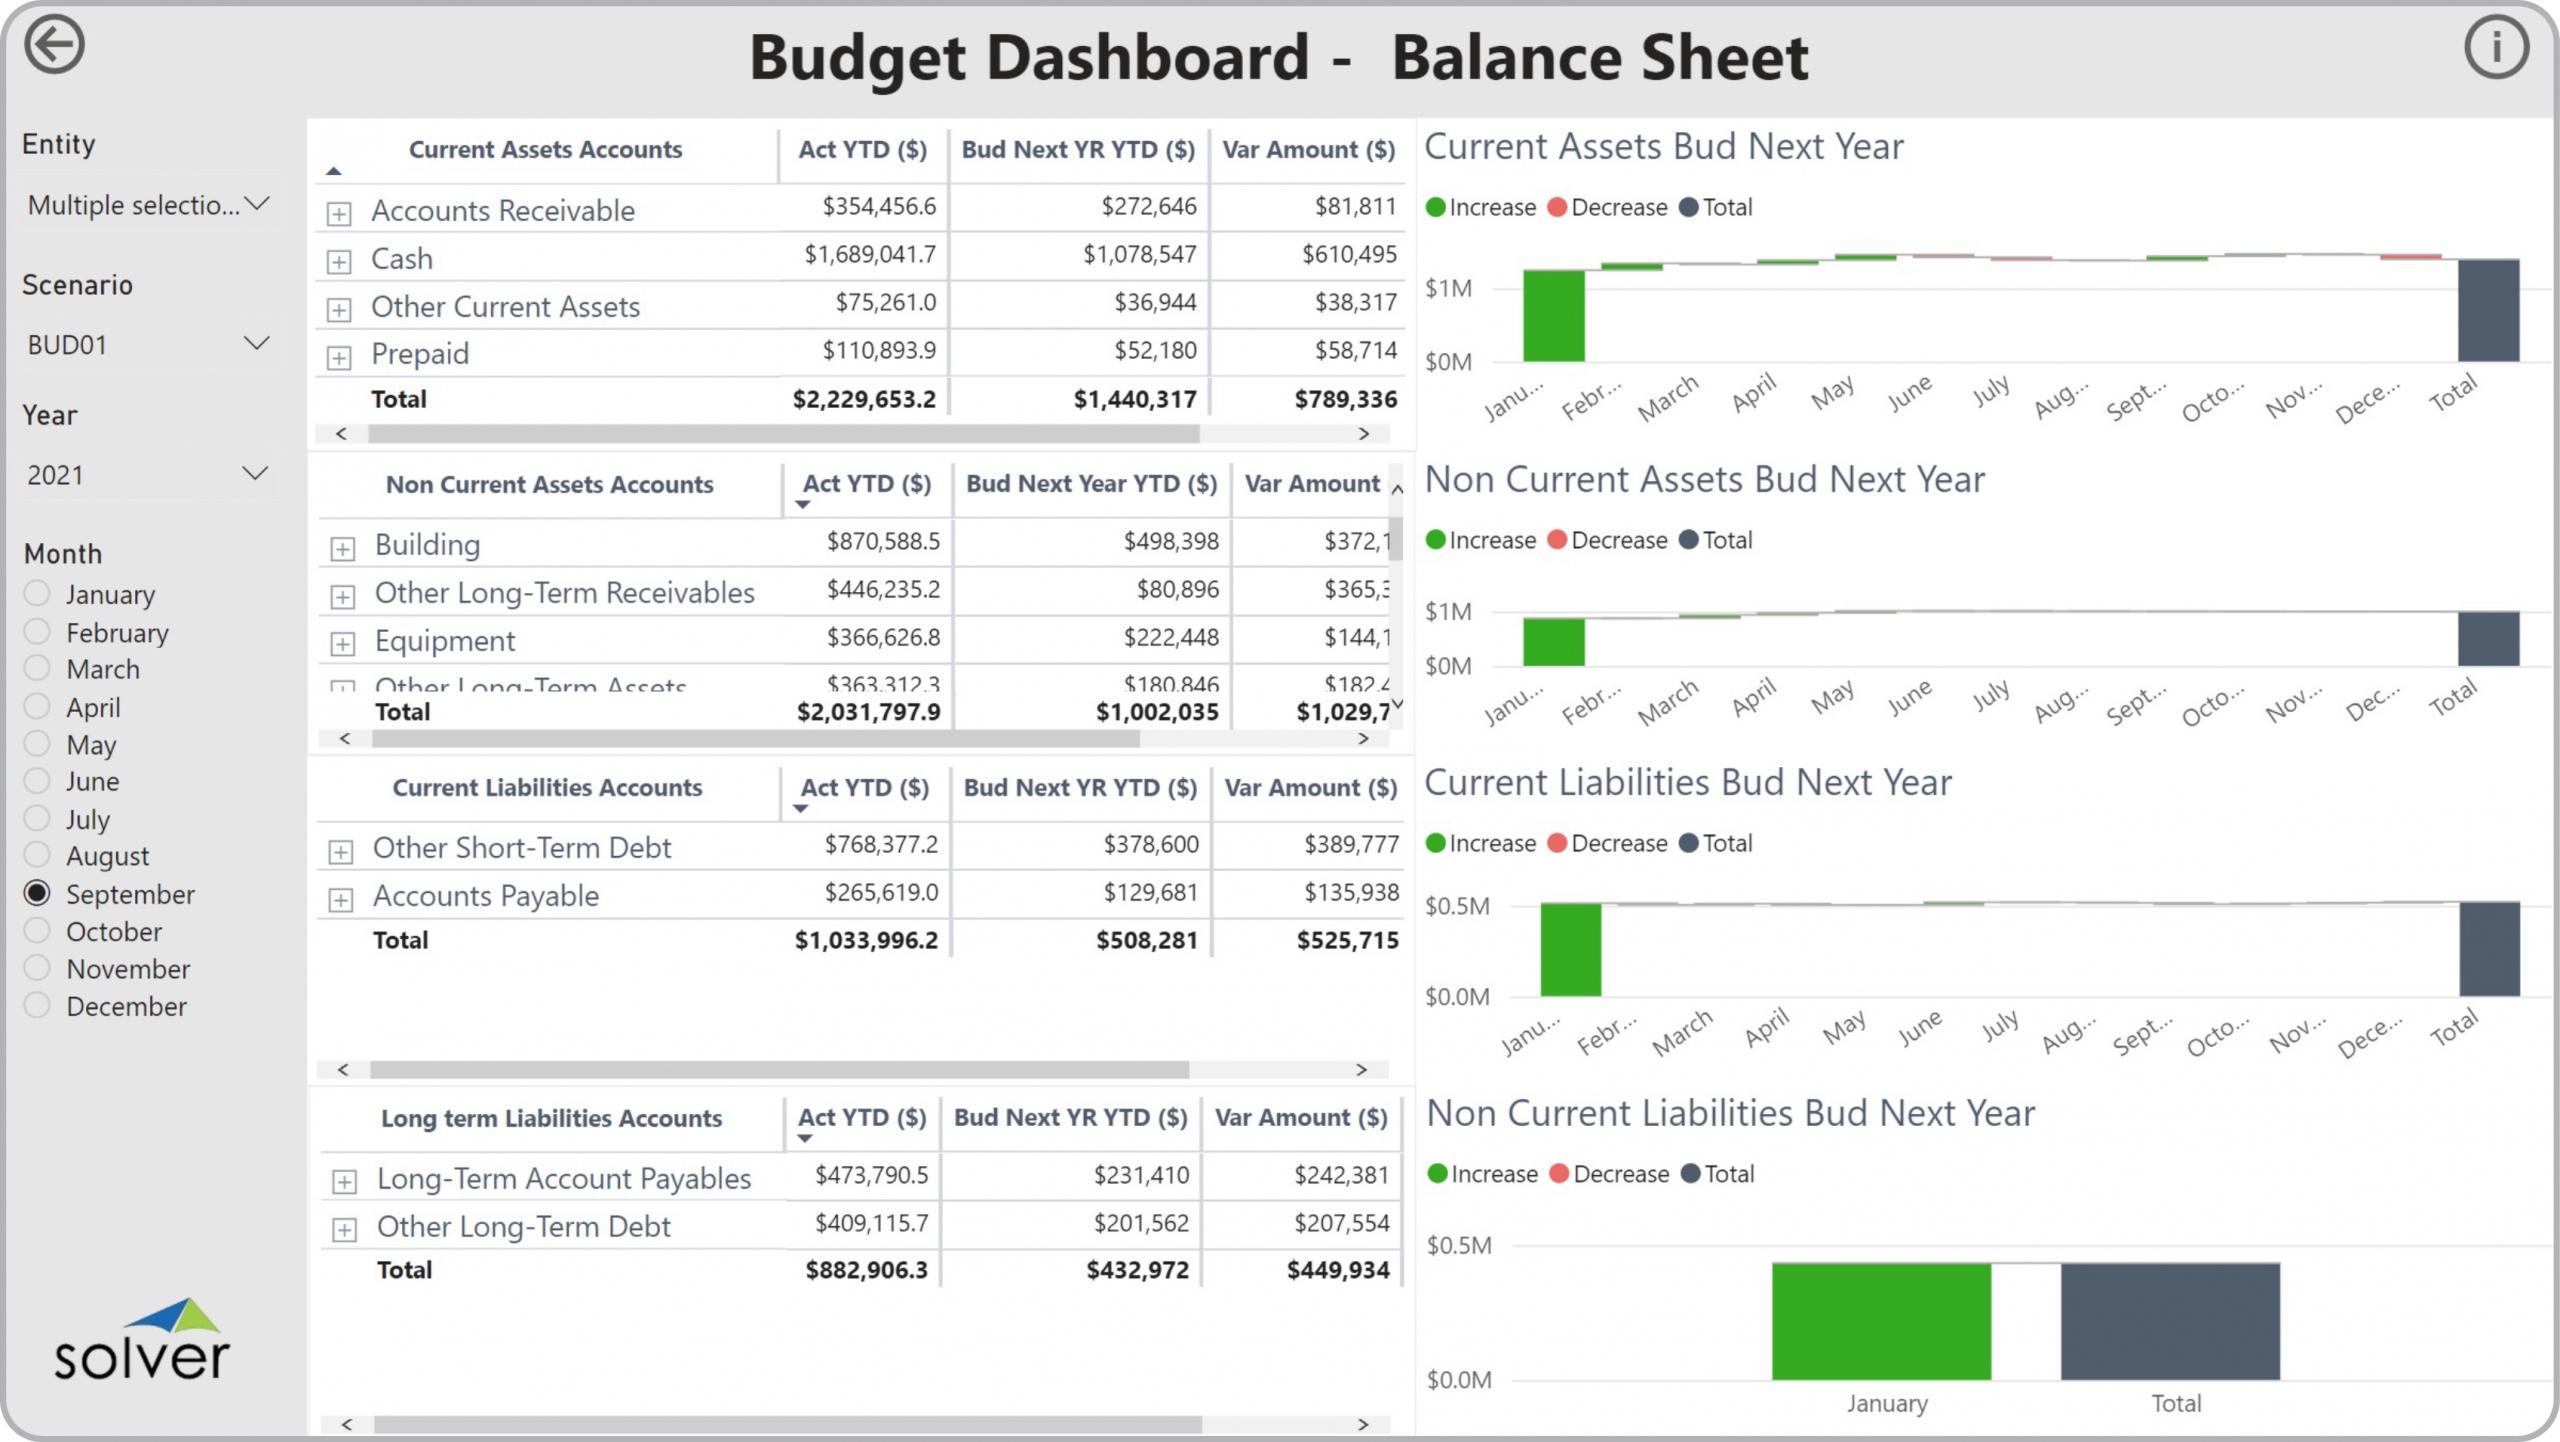 Example of a Balance Sheet Budget Dashboard to Streamline the Planning Process